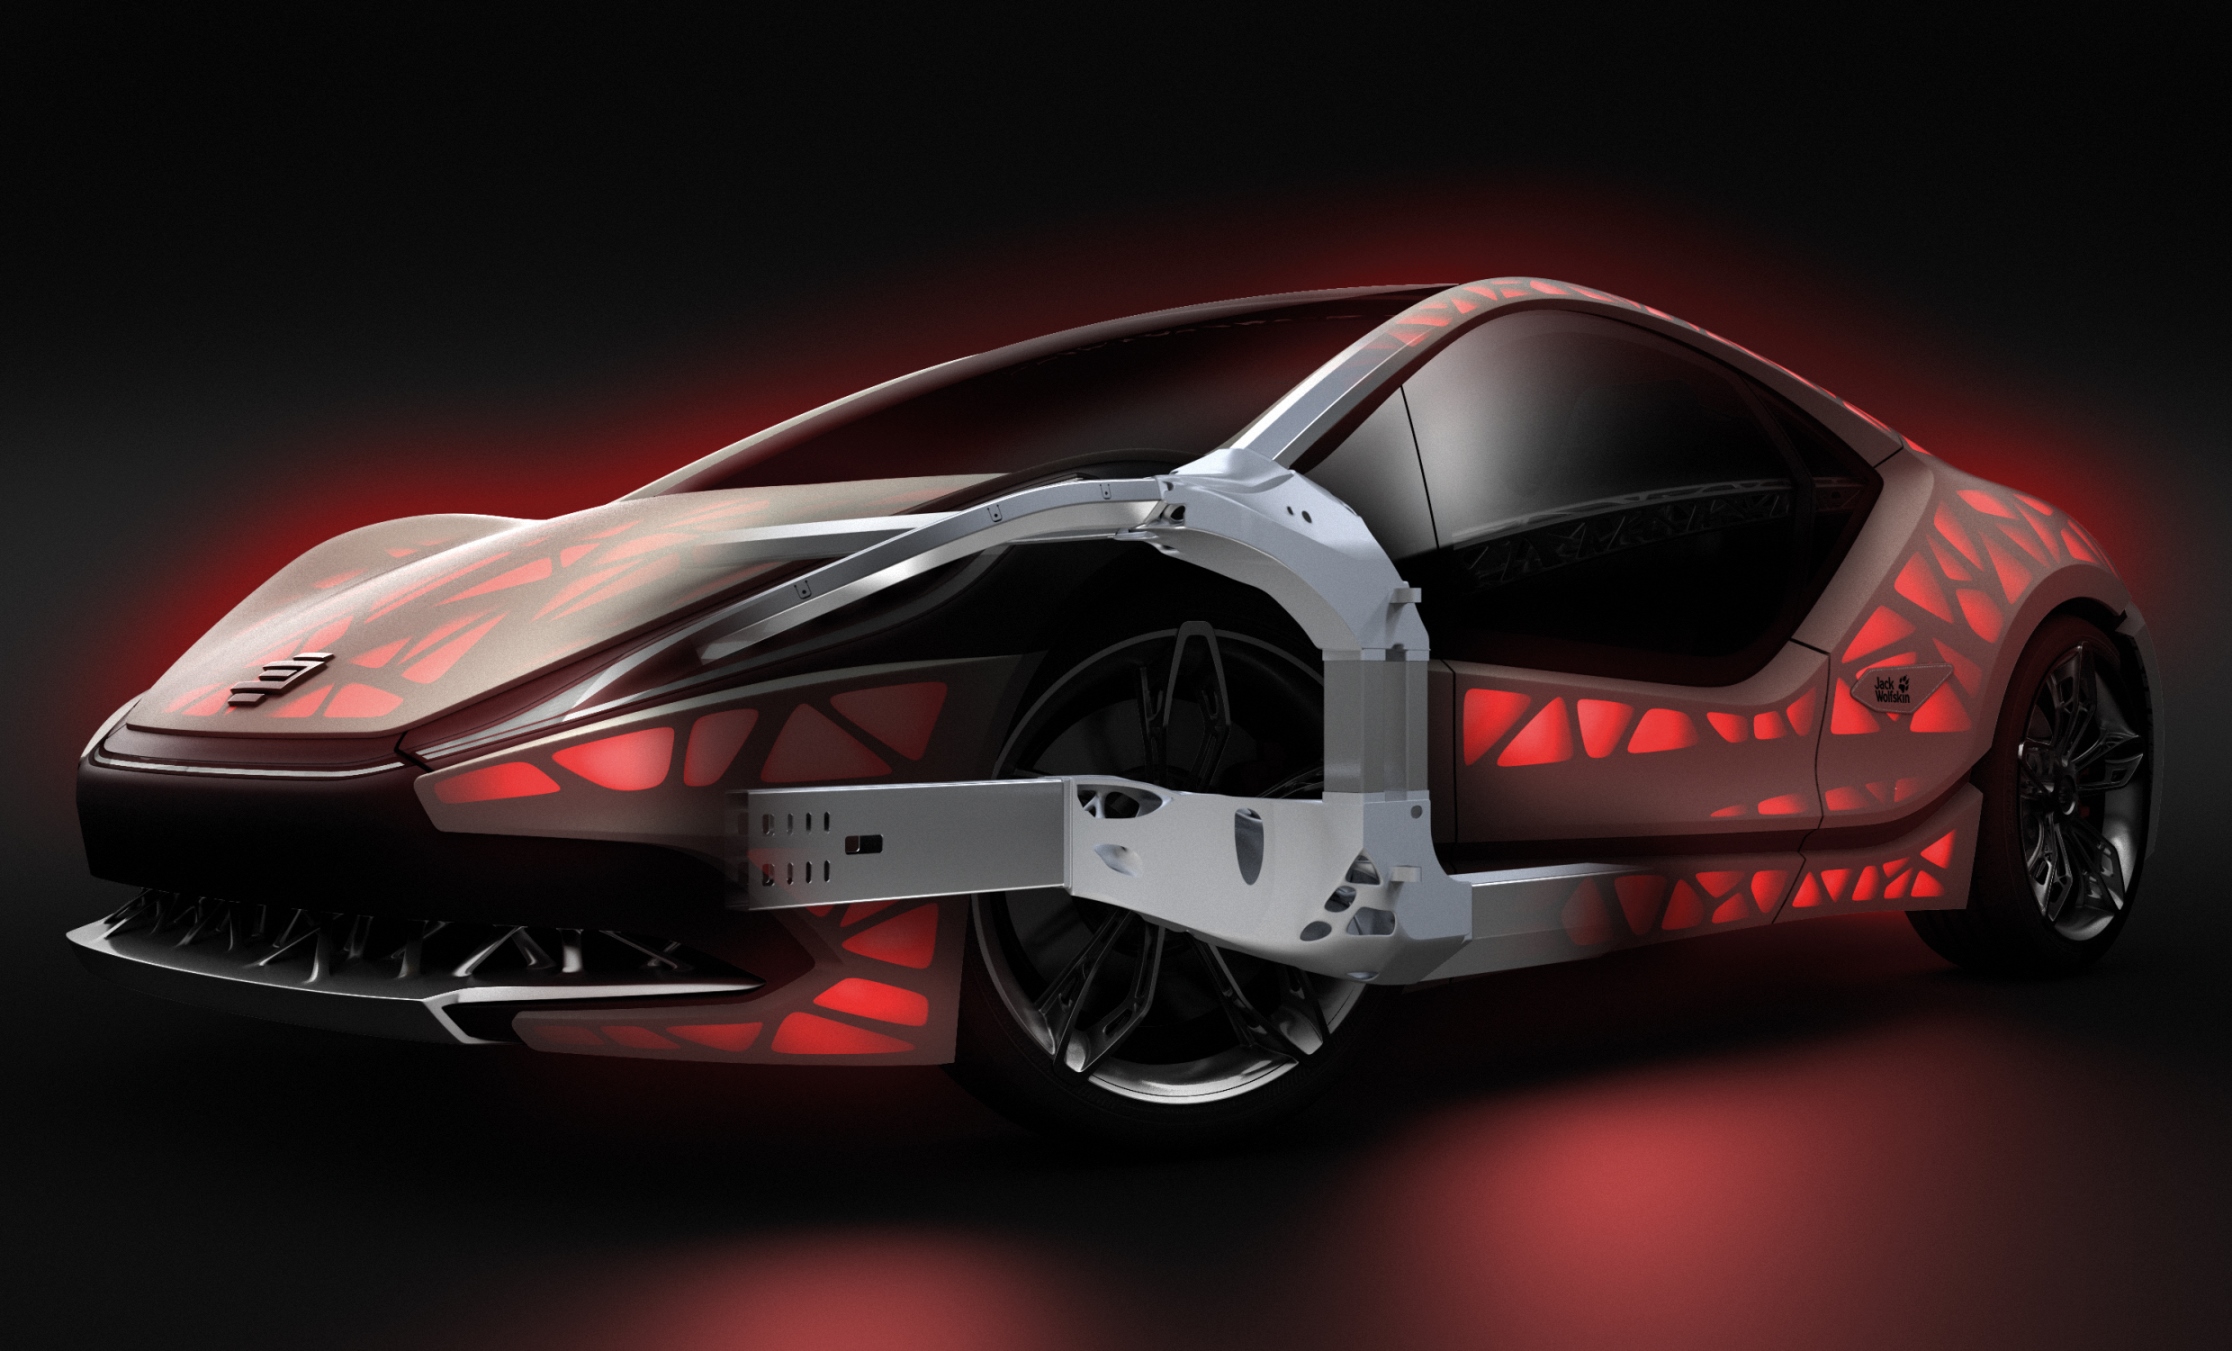 The Light Cocoon concept car, featuring additively manufactured nodes in the vehicle structure.